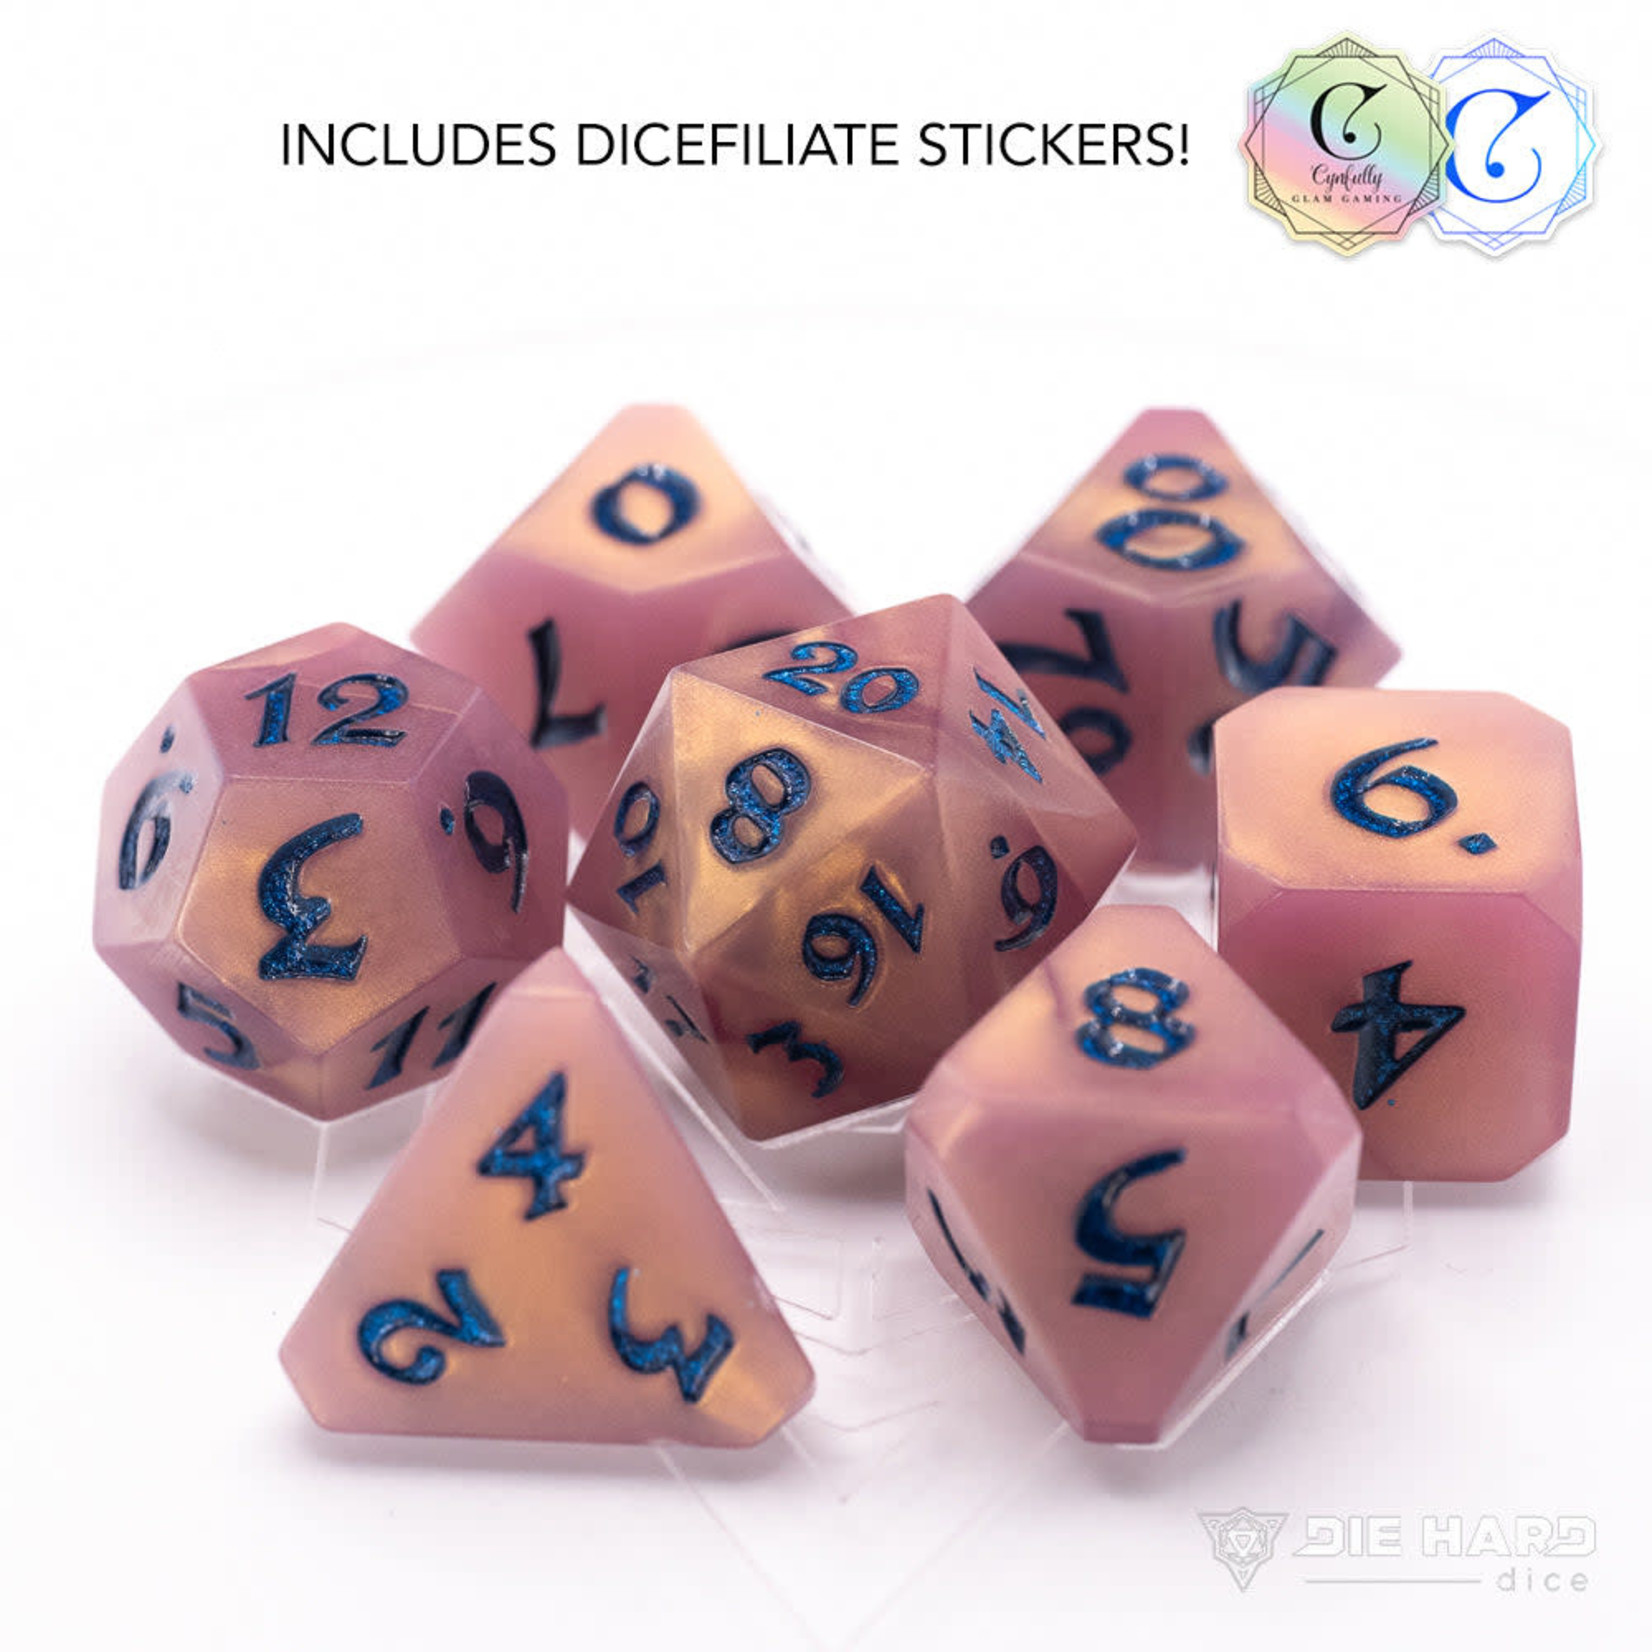 Die Hard Dice 7 Piece RPG Set - Avalore Cynfully Lux from Cynthia Marie